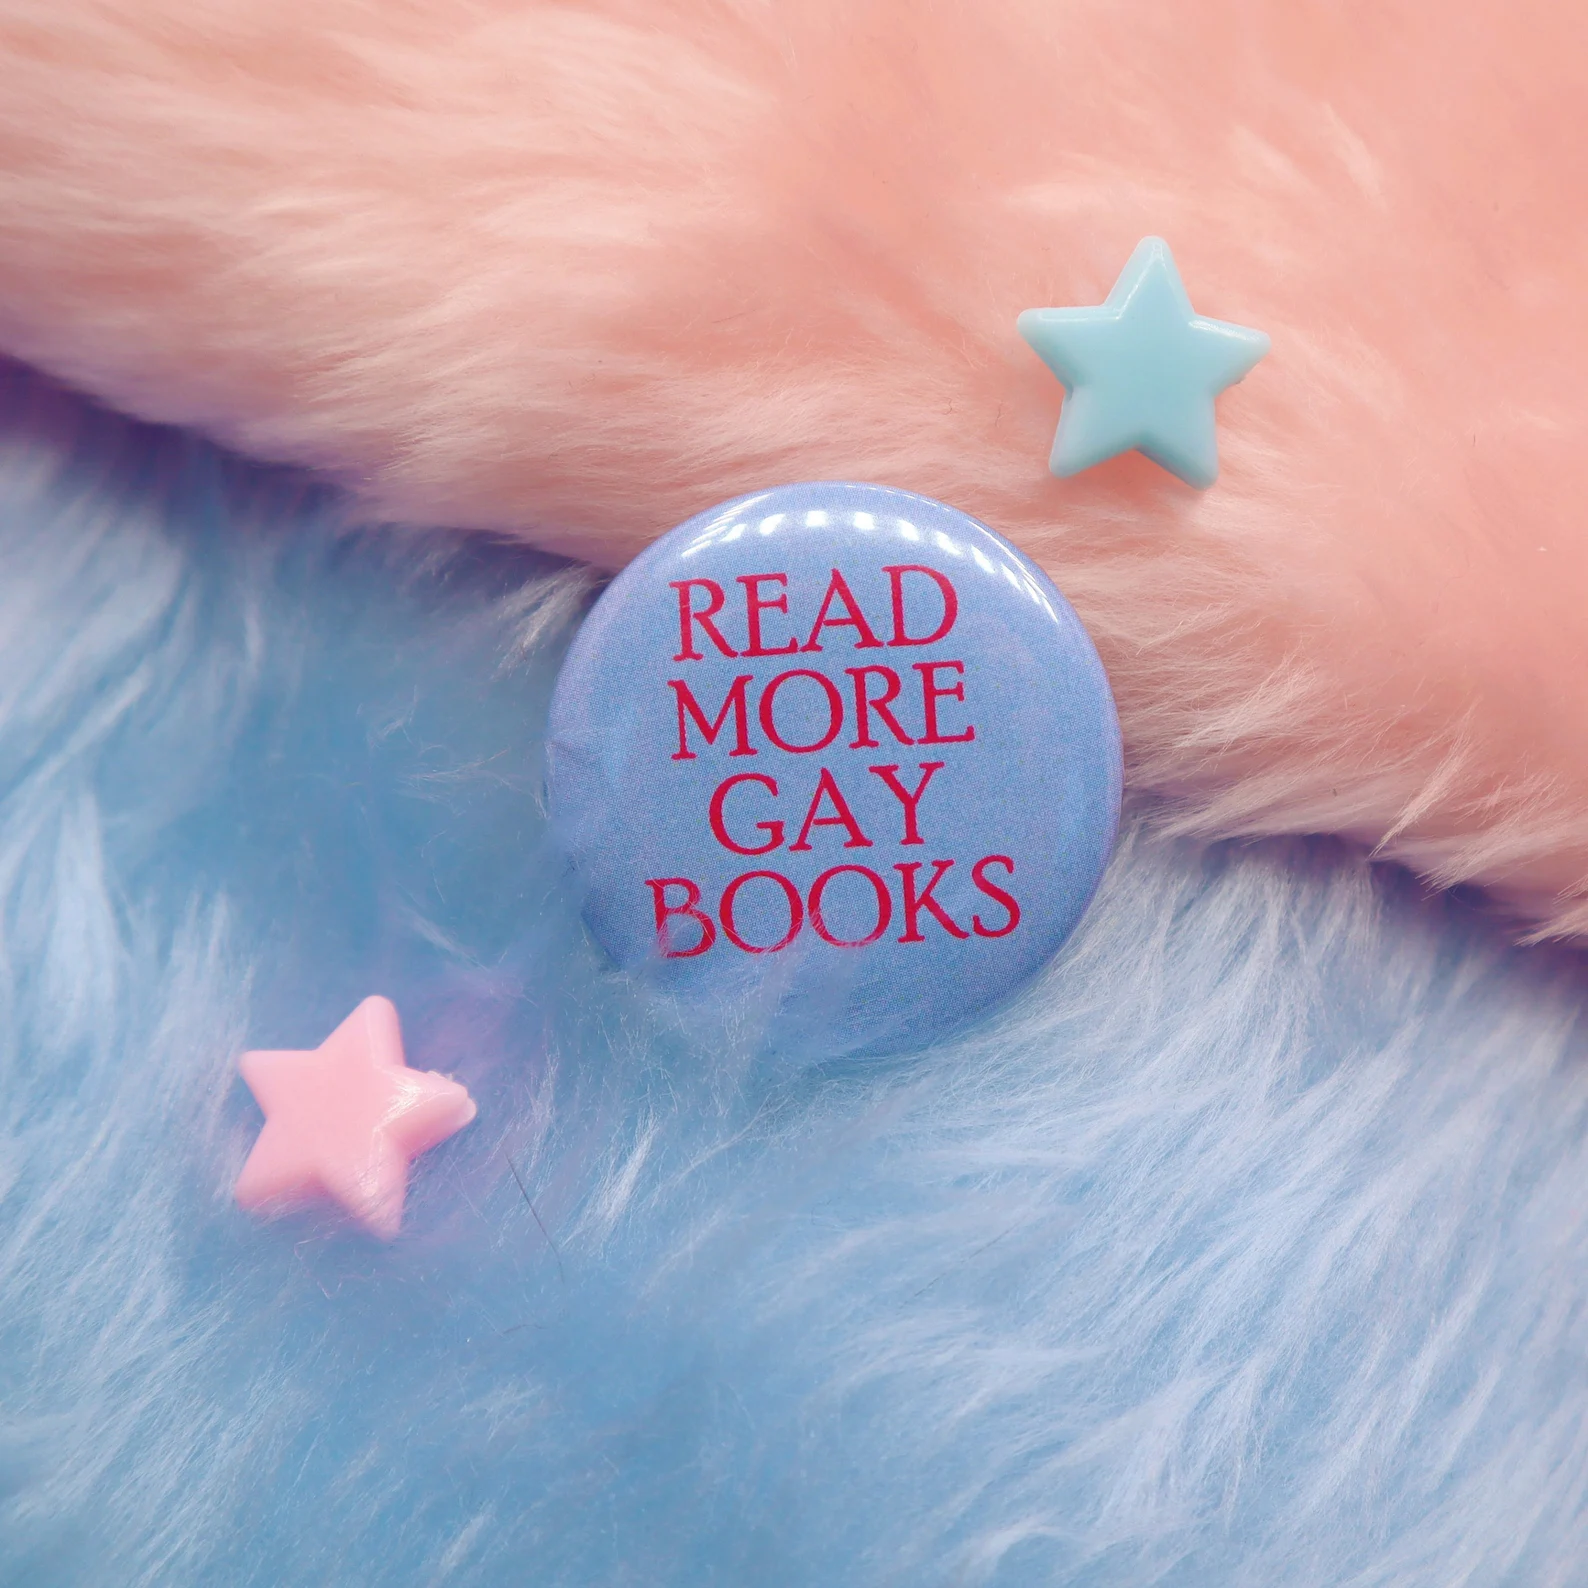 Image of a purple pin with the pink text "read more gay books."